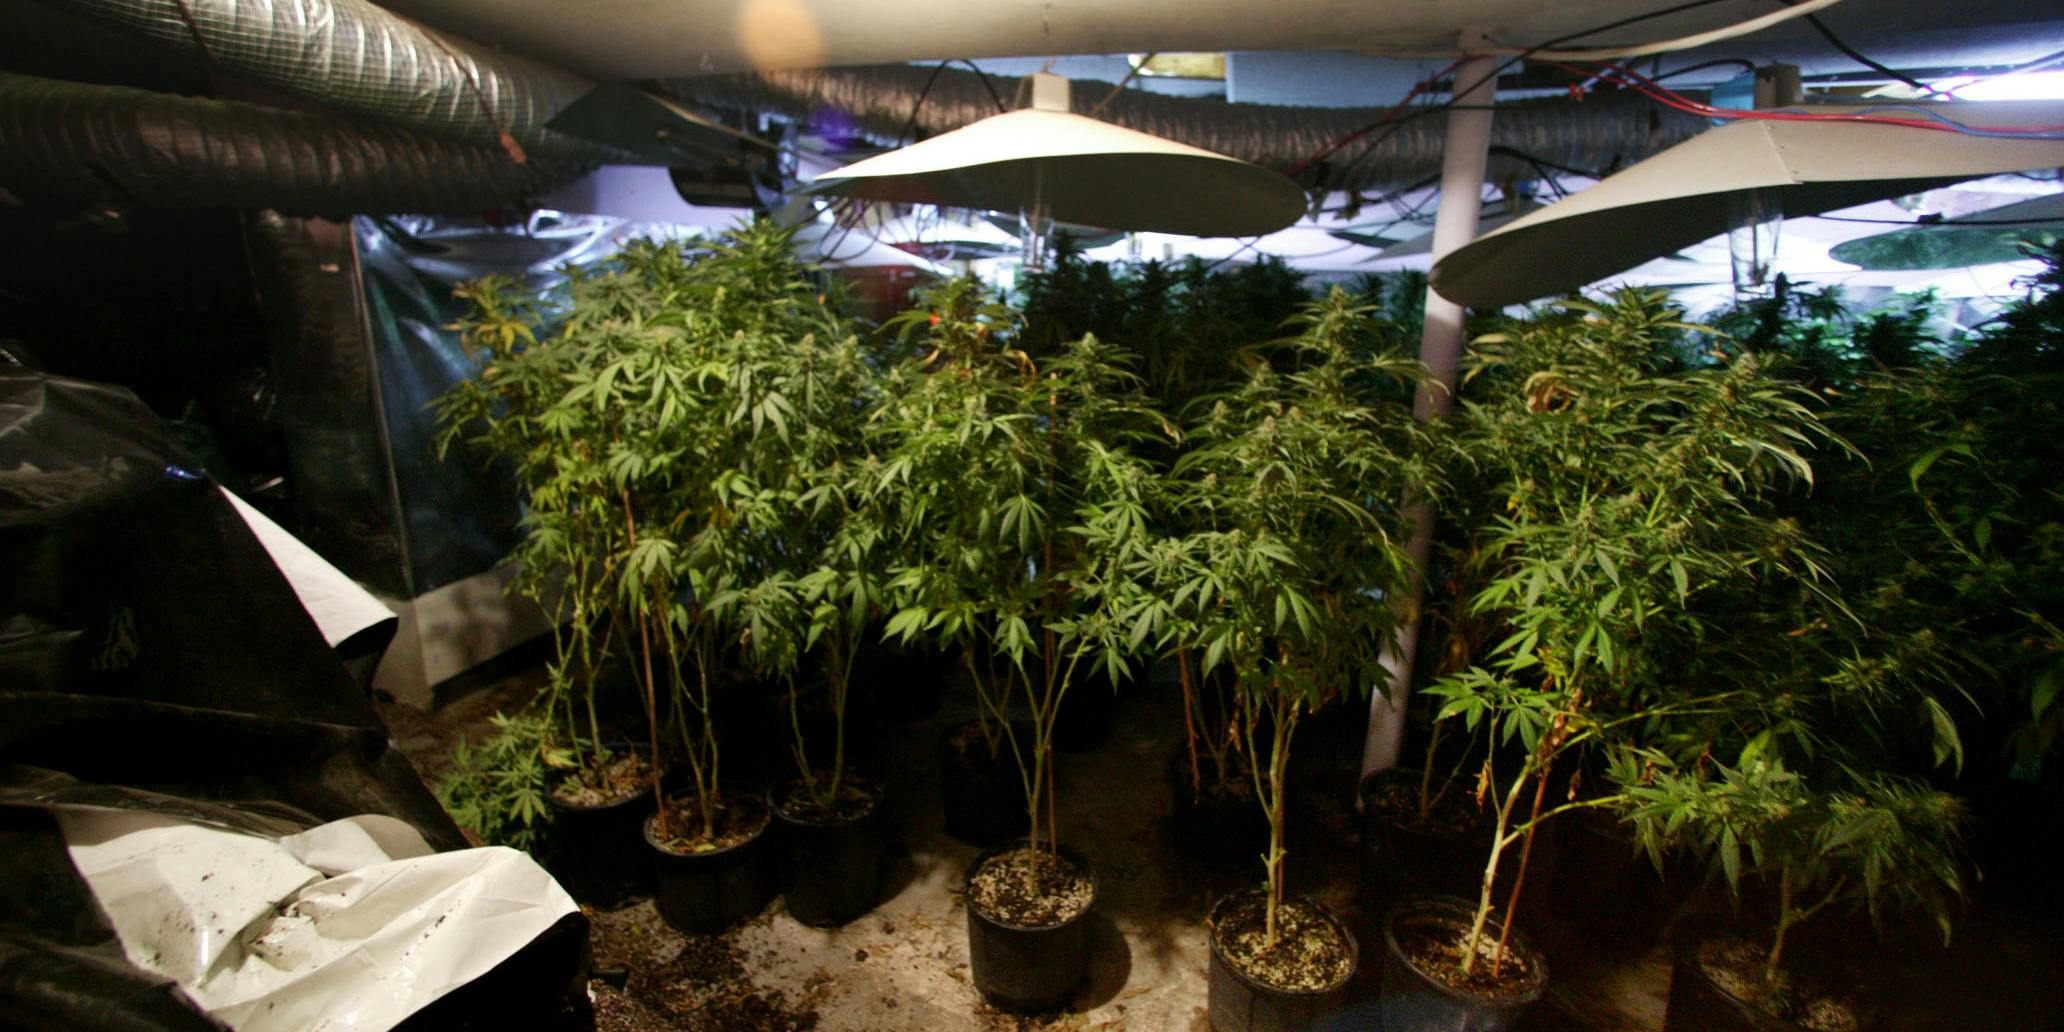 A UK man got out of significant jail time for weed by claiming all $35,000 worth he was growing was for personal use. Here, Four foot high marijuana plants are pictured in the basement of a "grow house" after a raid by the Toronto Police Service's drug squad in Toronto, Ontario, Canada on July 14, 2005.